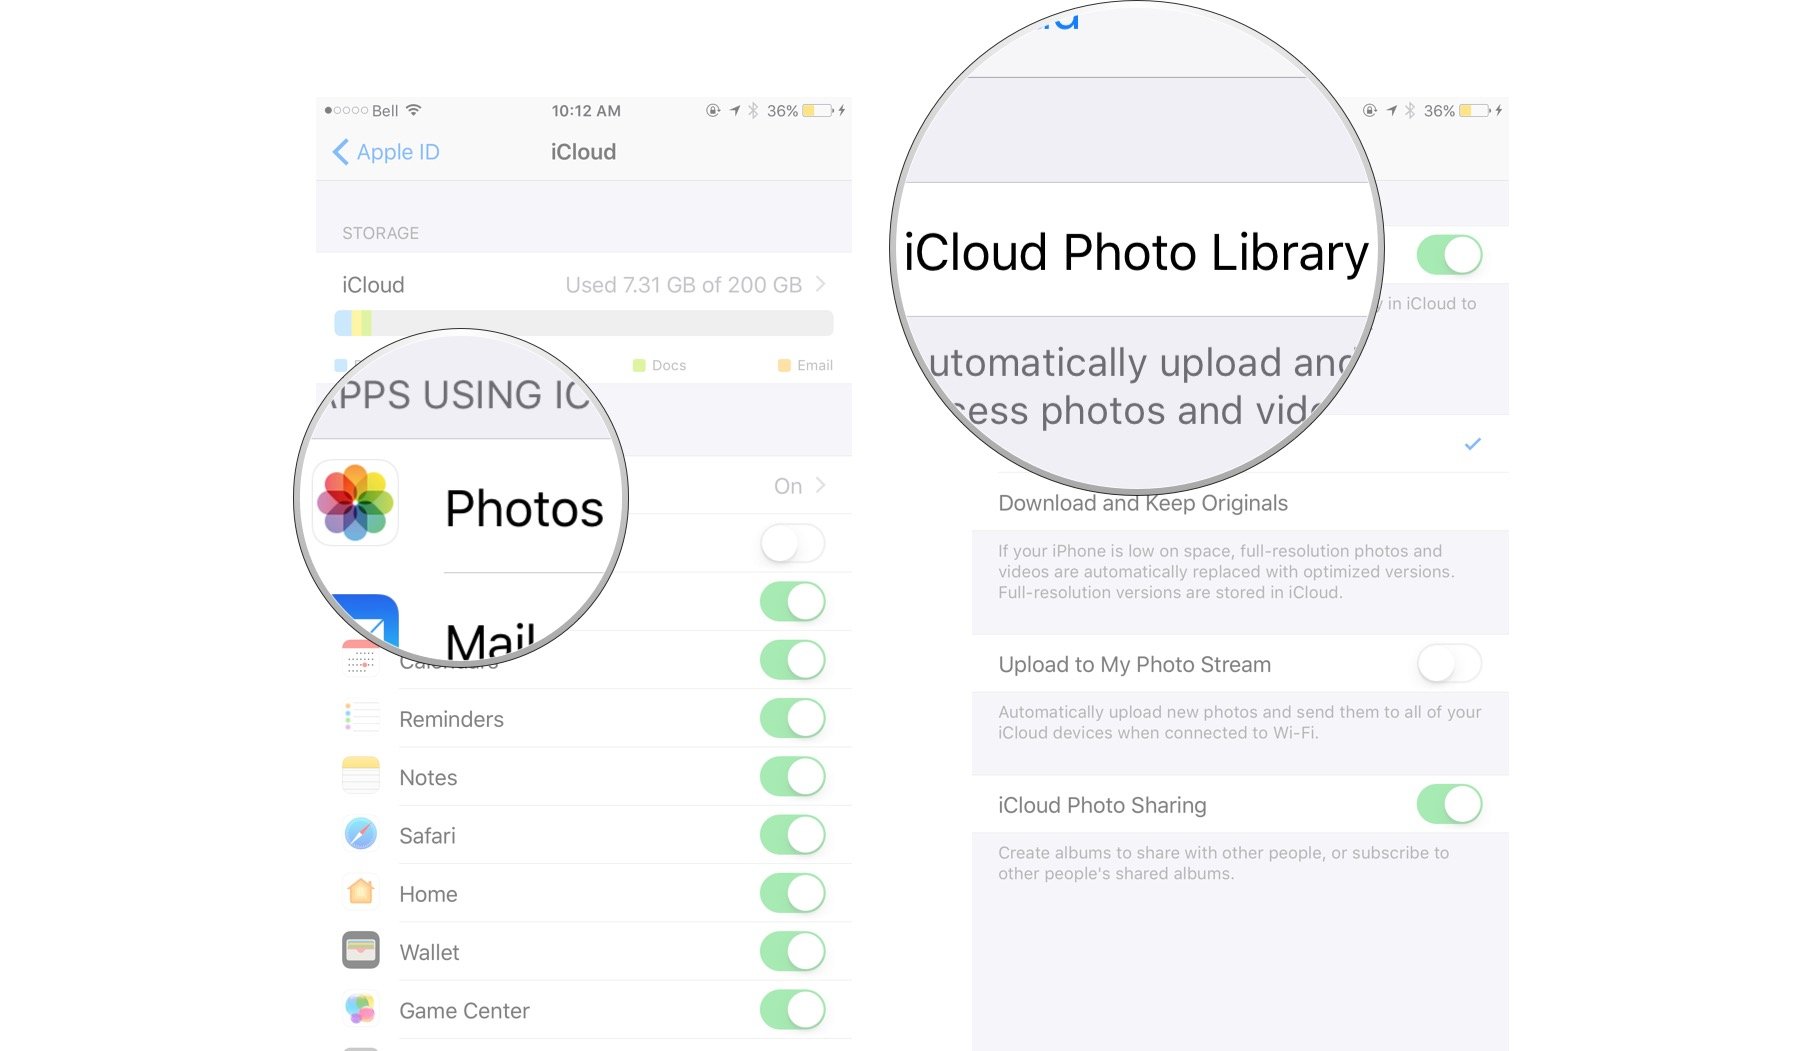 How to set up and use iCloud Photo Library on iPhone and iPad